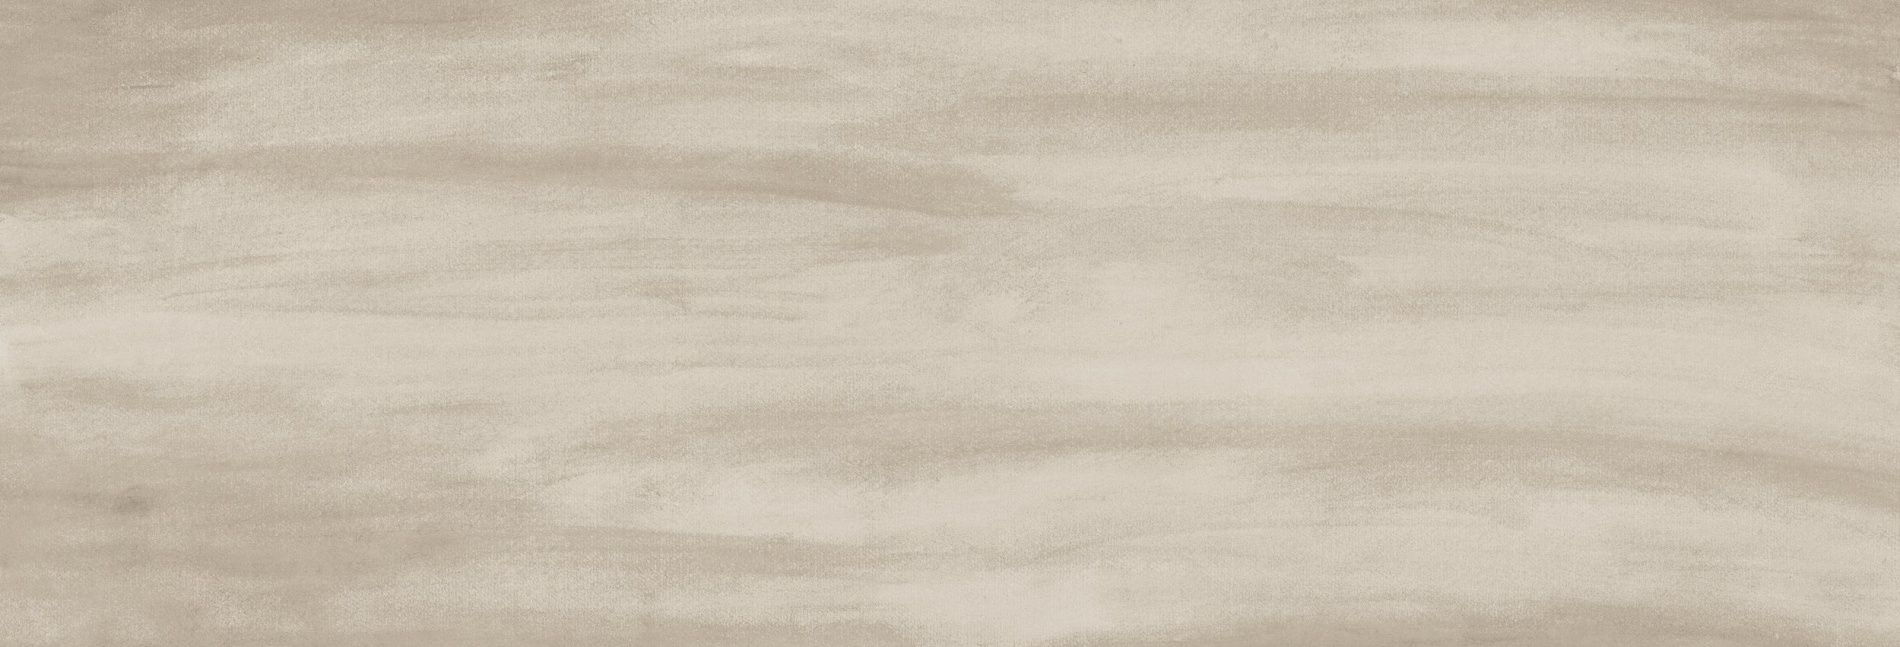 Lincoln Taupe 30x90